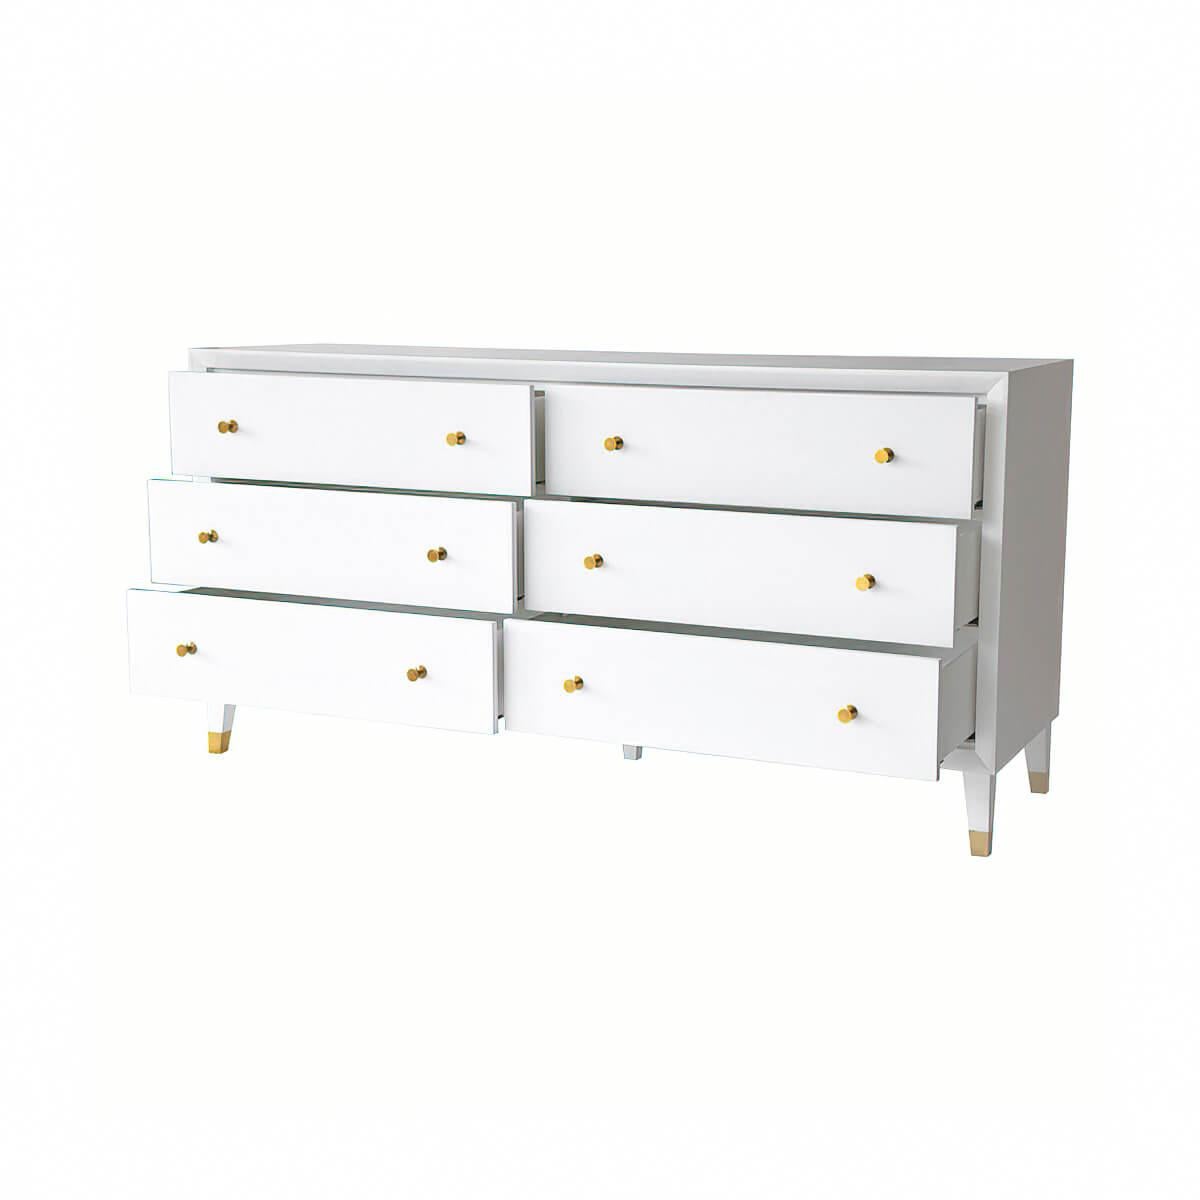 Mid Century style white dresser, with six drawers, beveled trim, hand cast polished brass hardware with our 'ghost' white lacquered satin finish.

Dimensions: 68